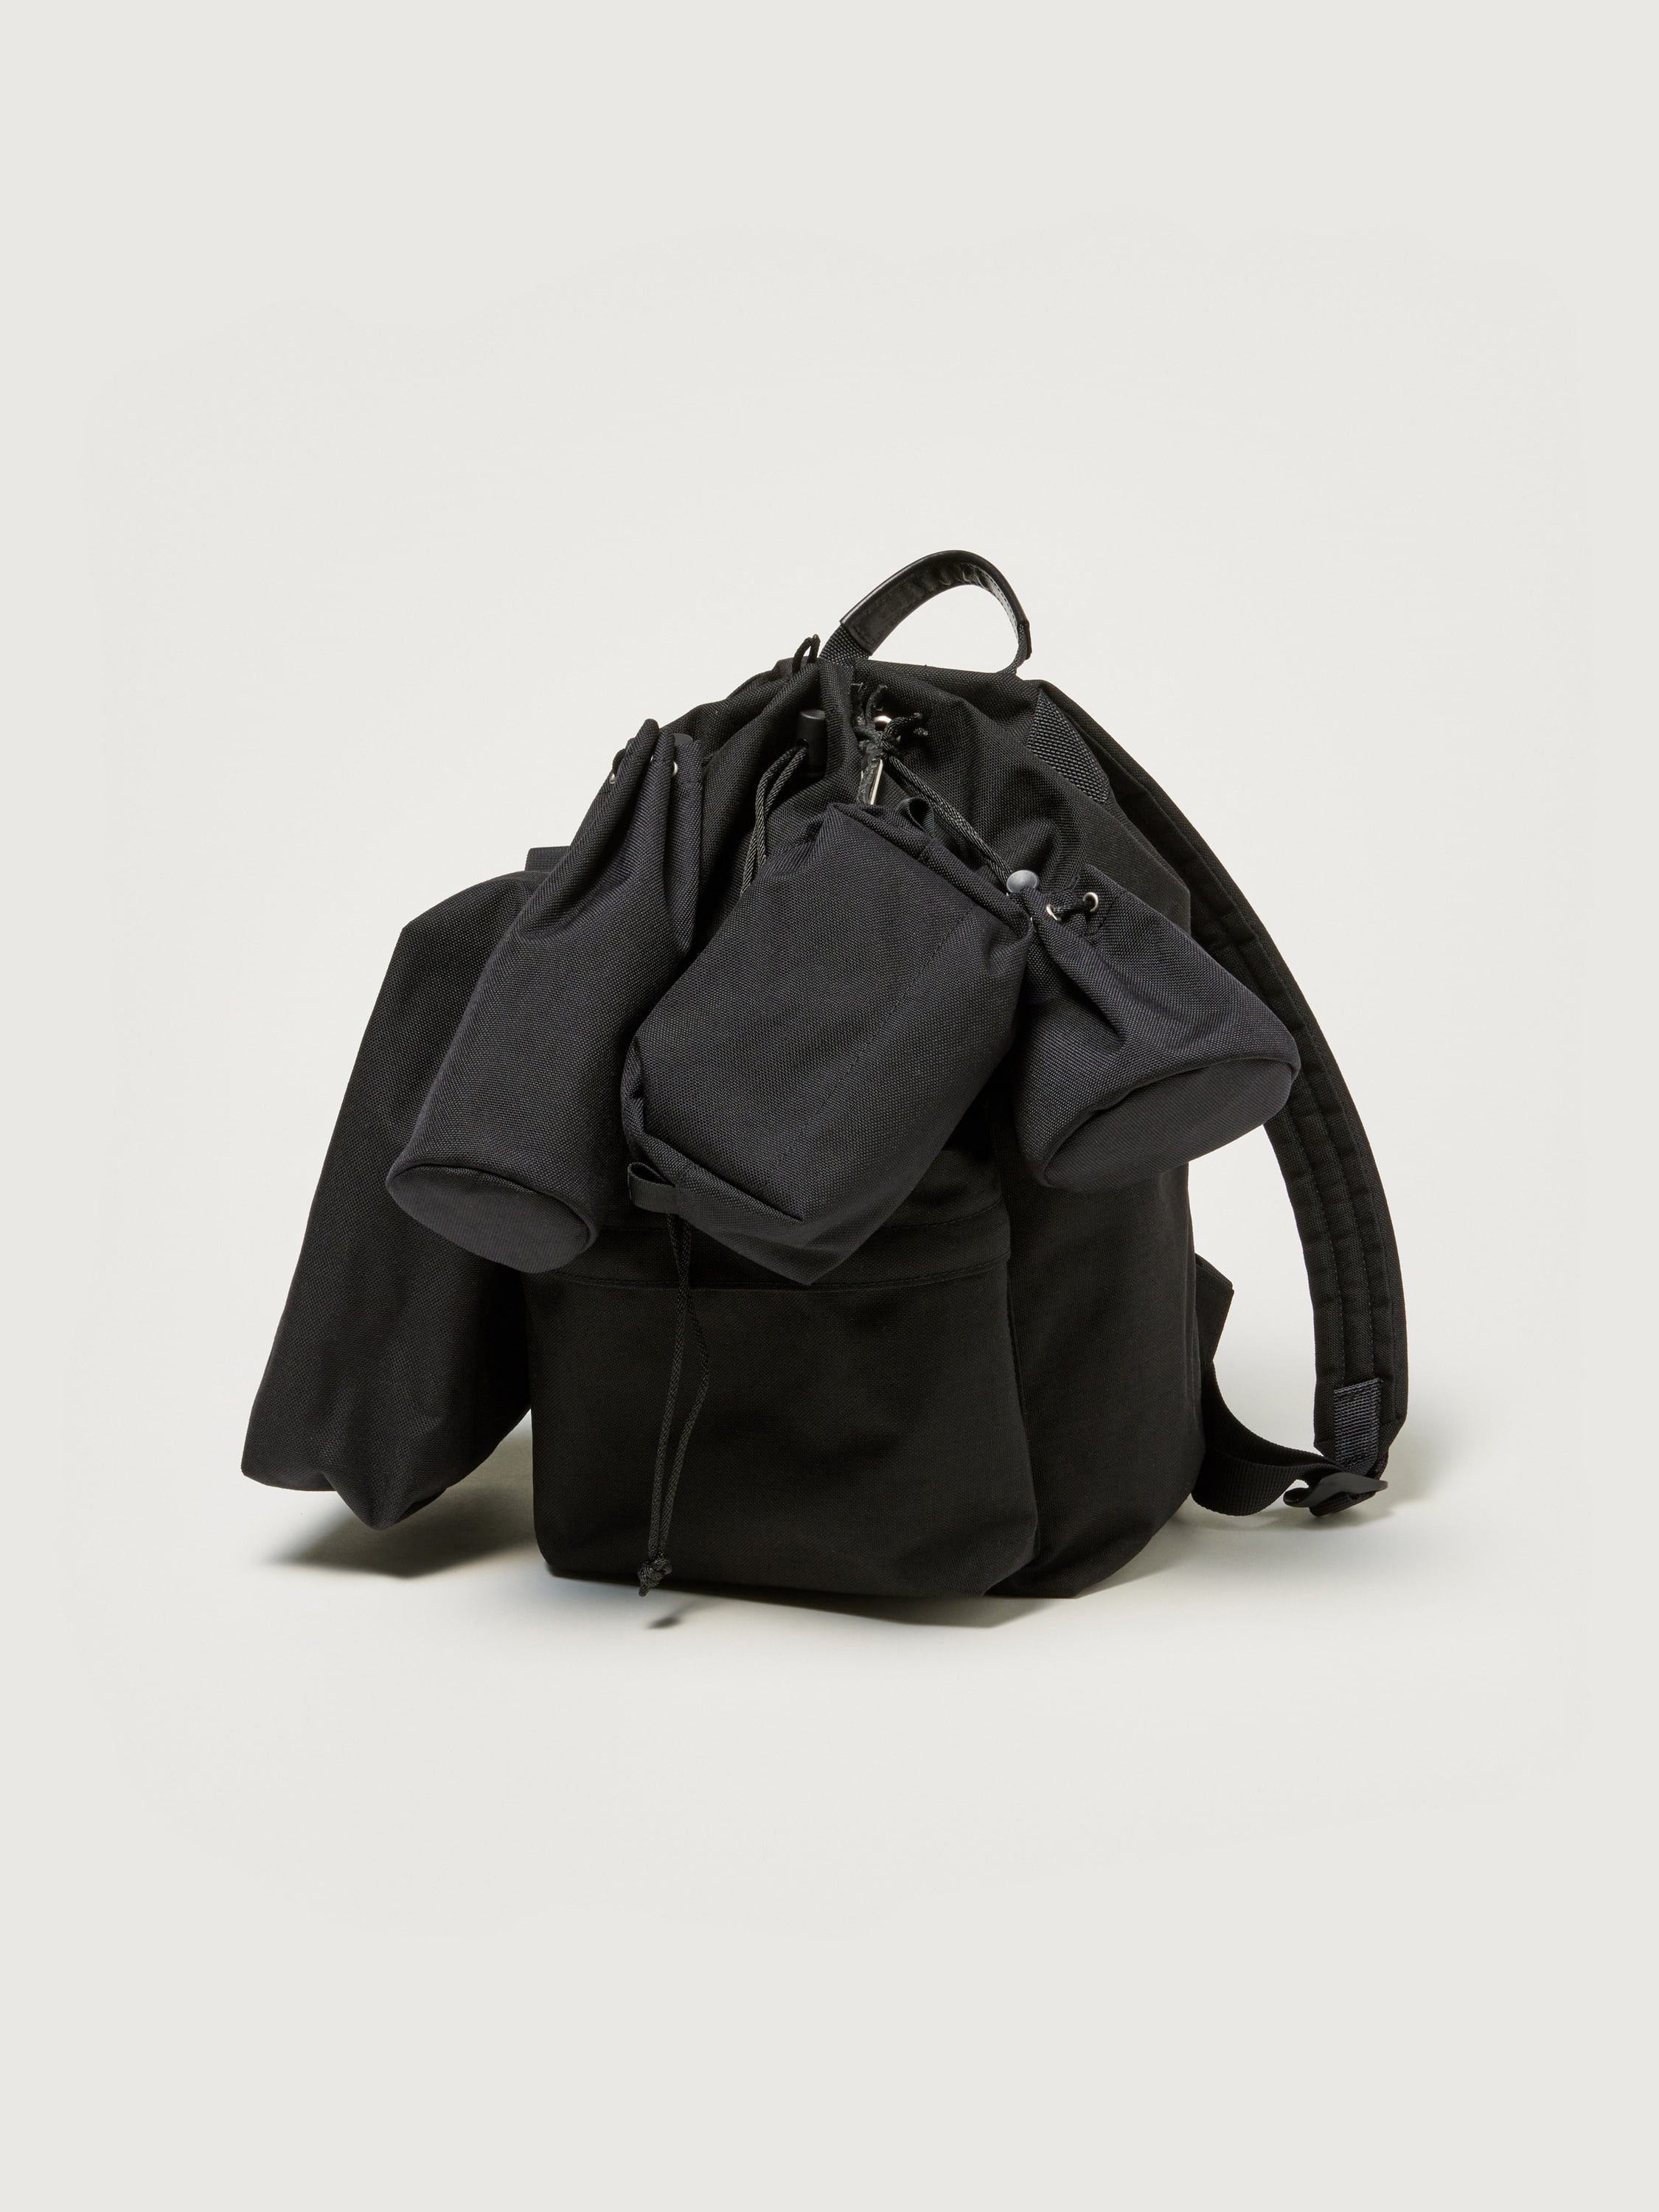 SMALL BACKPACK SET MADE BY AETA 詳細画像 BLACK 2